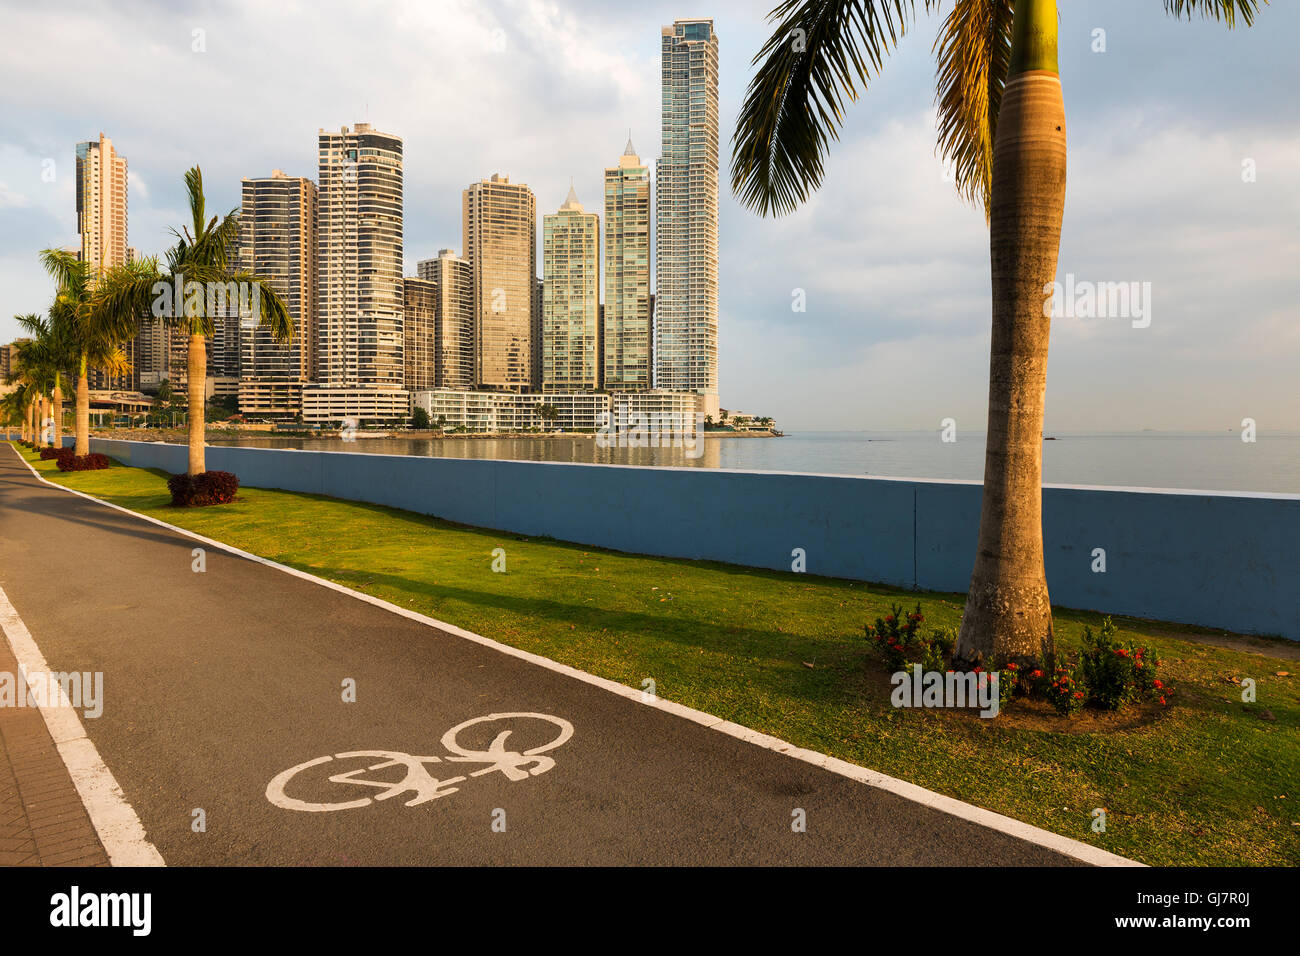 View of the financial district in downtown City of Panama, Panama, with a cycling lane and Palm Trees; Concept for travel in Pan Stock Photo